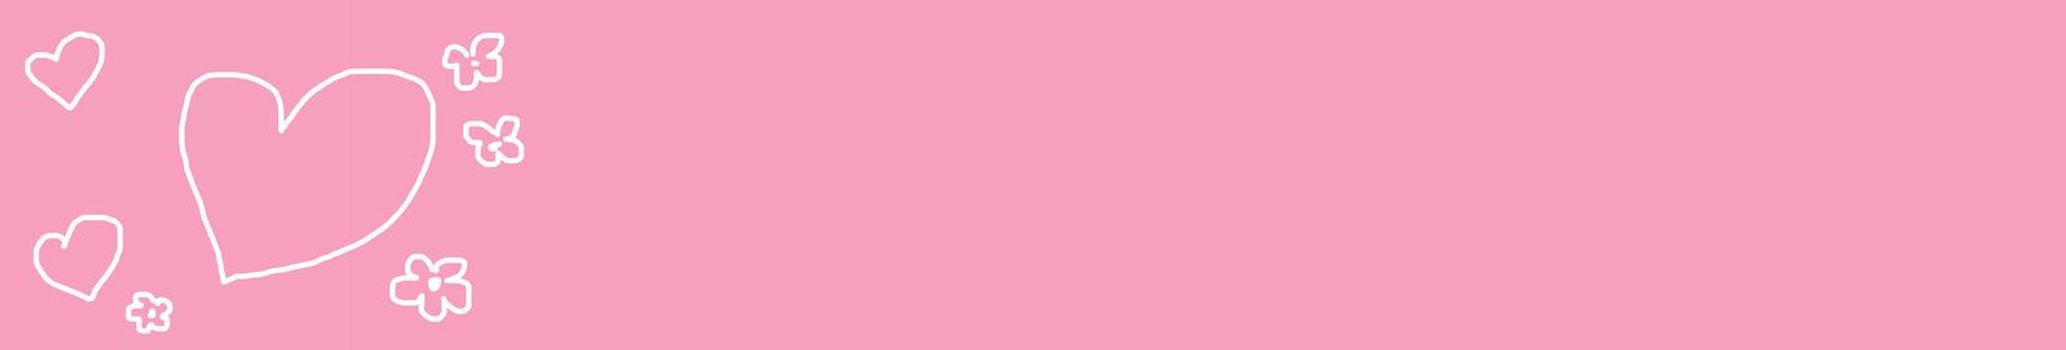 Panorama of white painted hearts on a pink background.The concept of love.